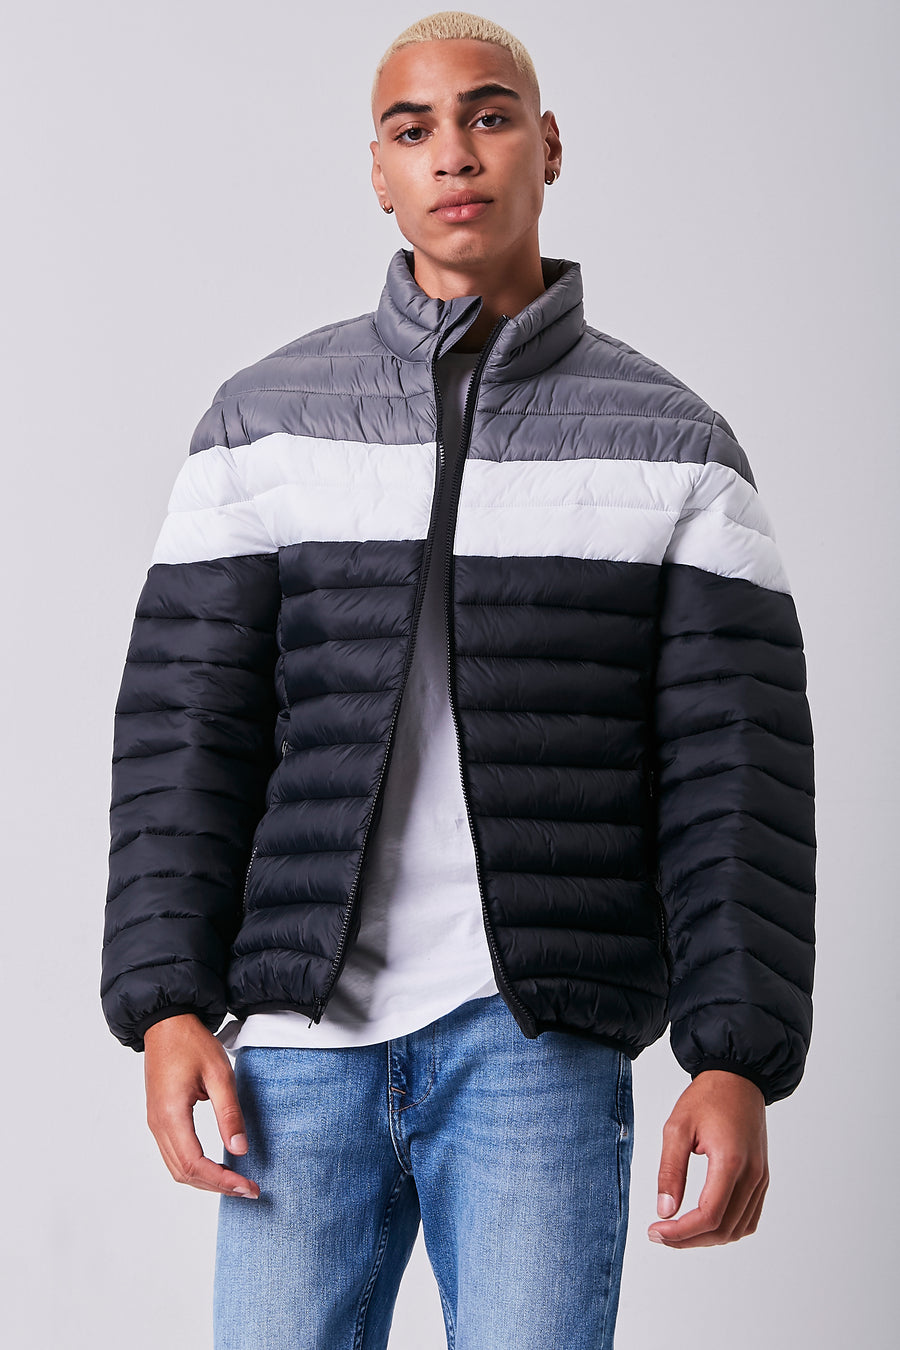 Shop for Jackets Outerwear for Men at Best Price | F21 UAE